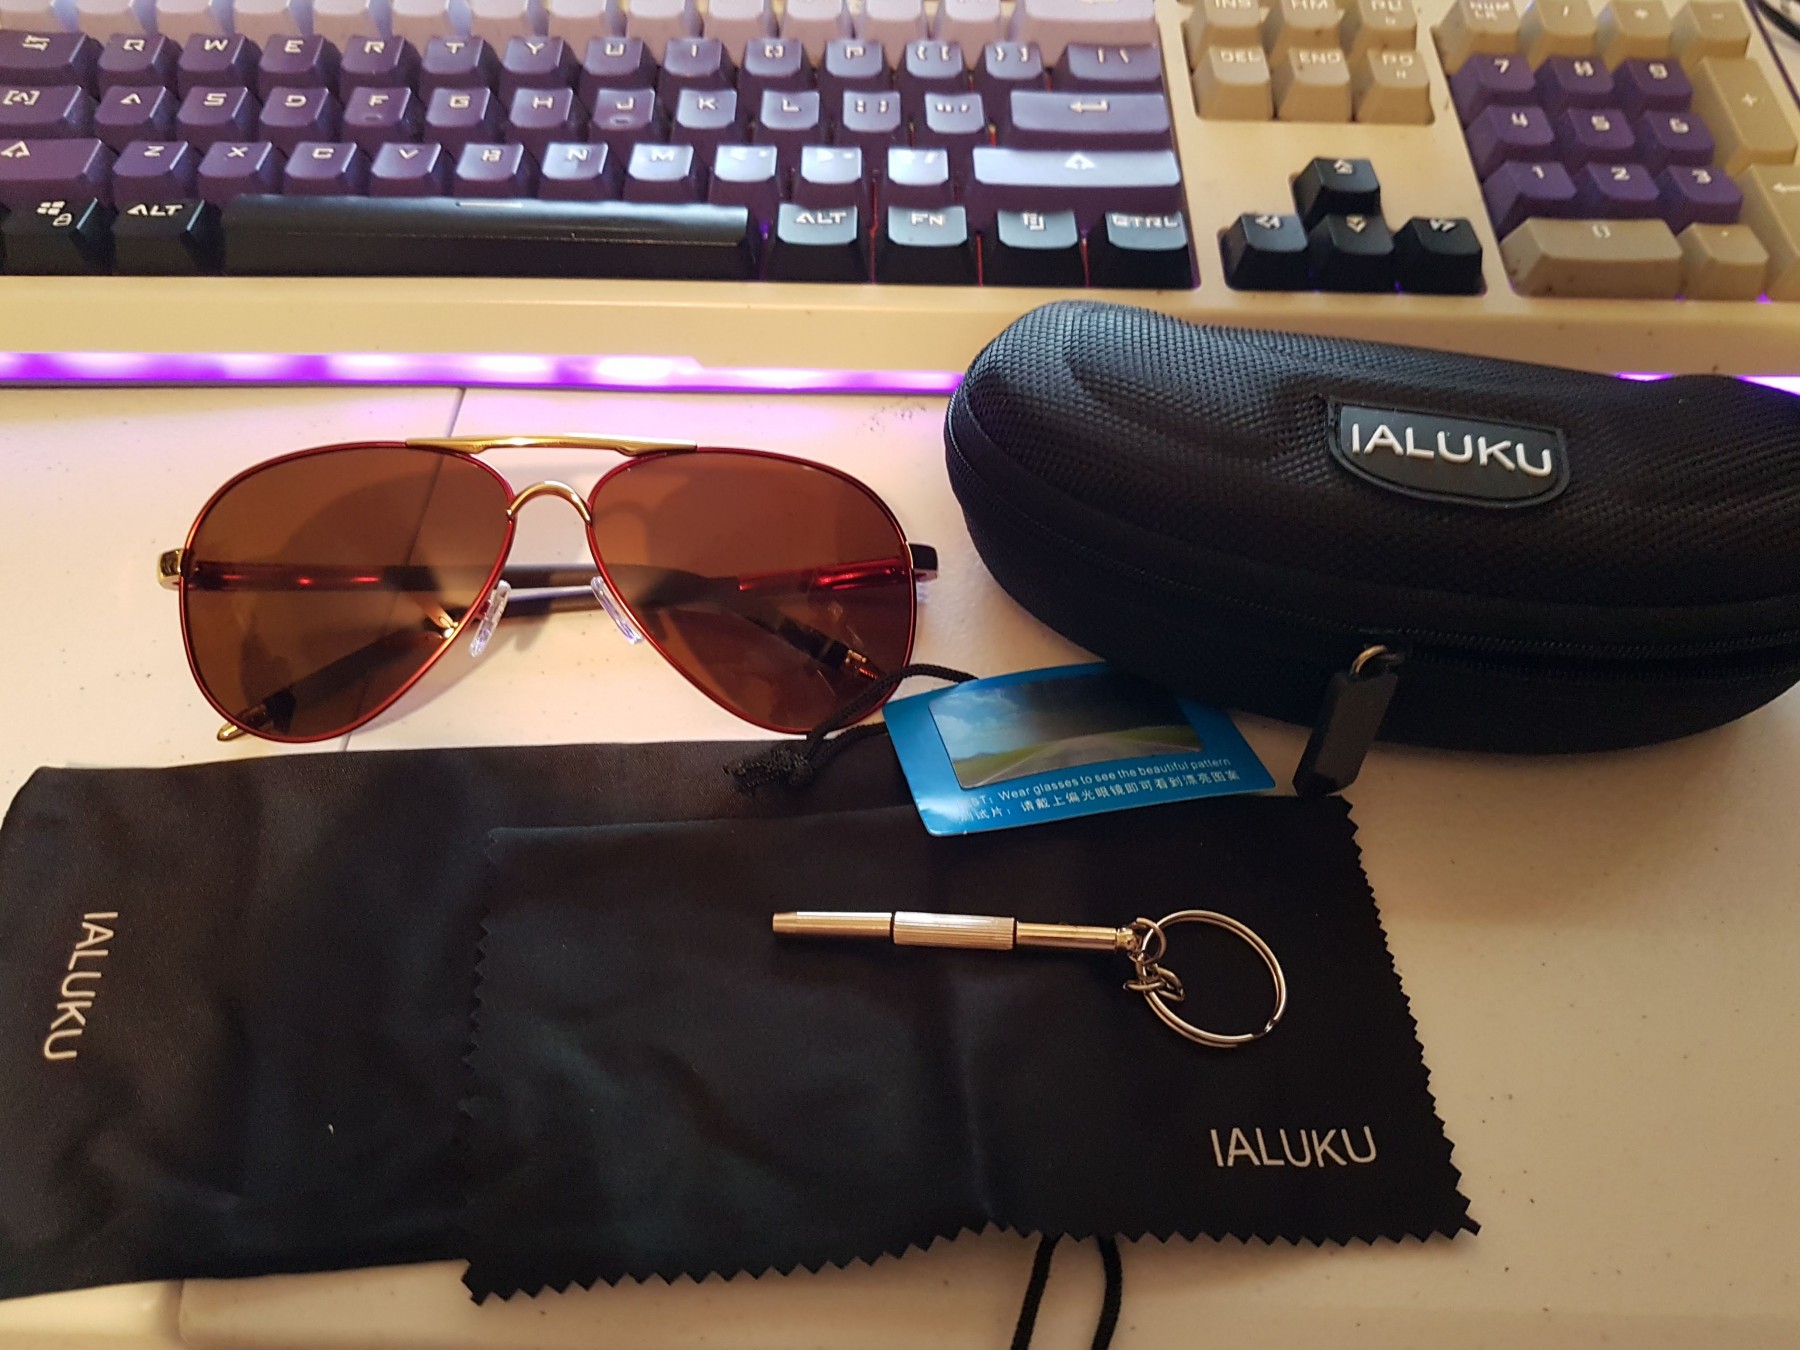 Extremely high quality Polarized Aviator Sunglasses, I just had to get a second pair.